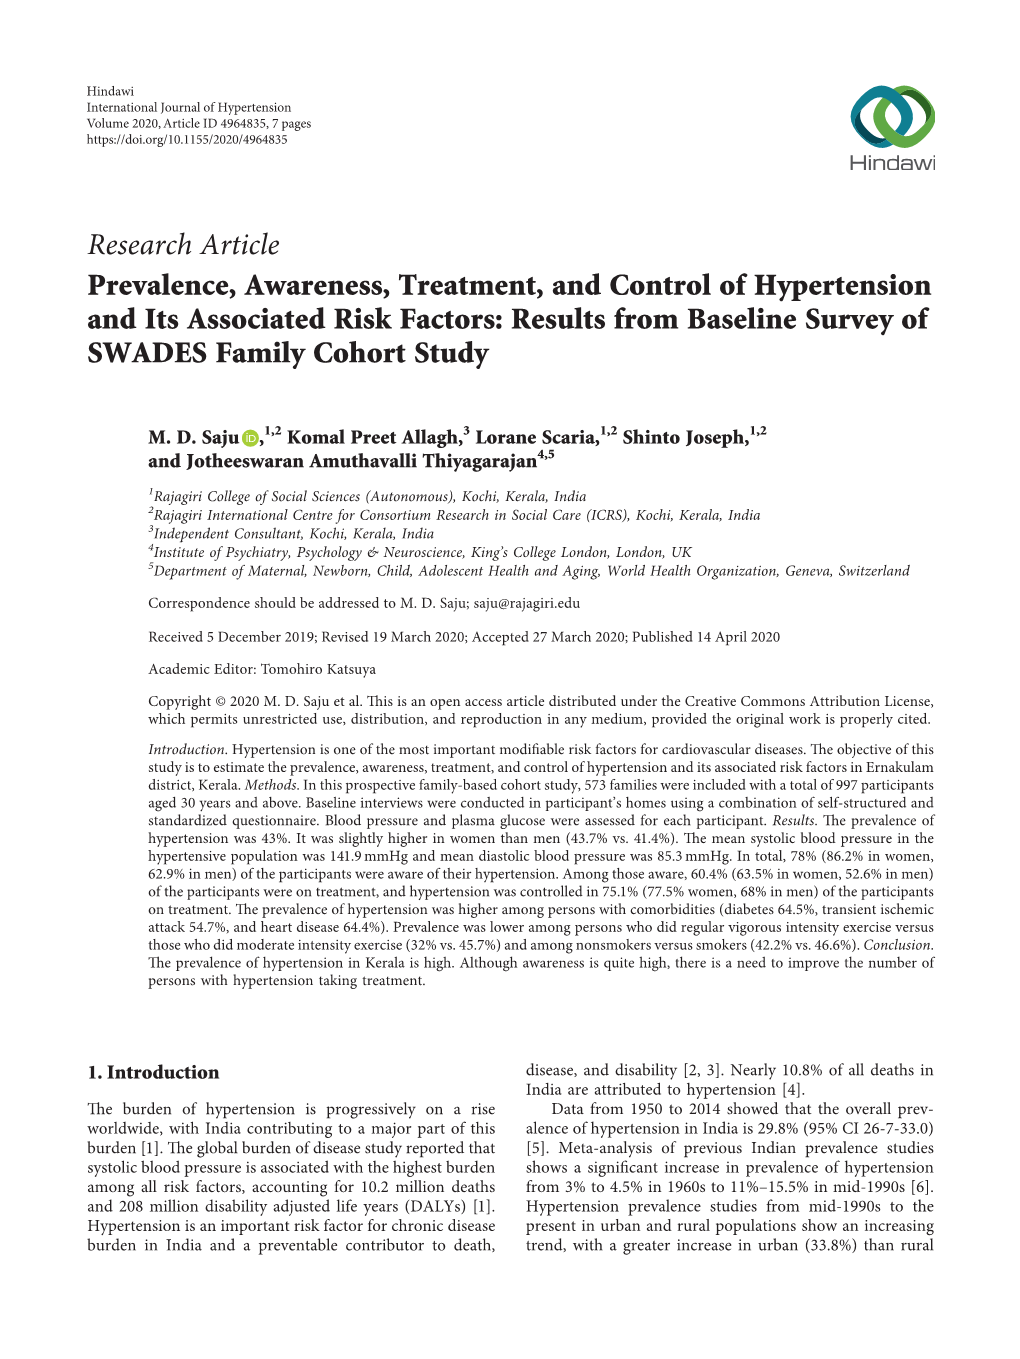 Prevalence, Awareness, Treatment, and Control of Hypertension and Its Associated Risk Factors: Results from Baseline Survey of SWADES Family Cohort Study